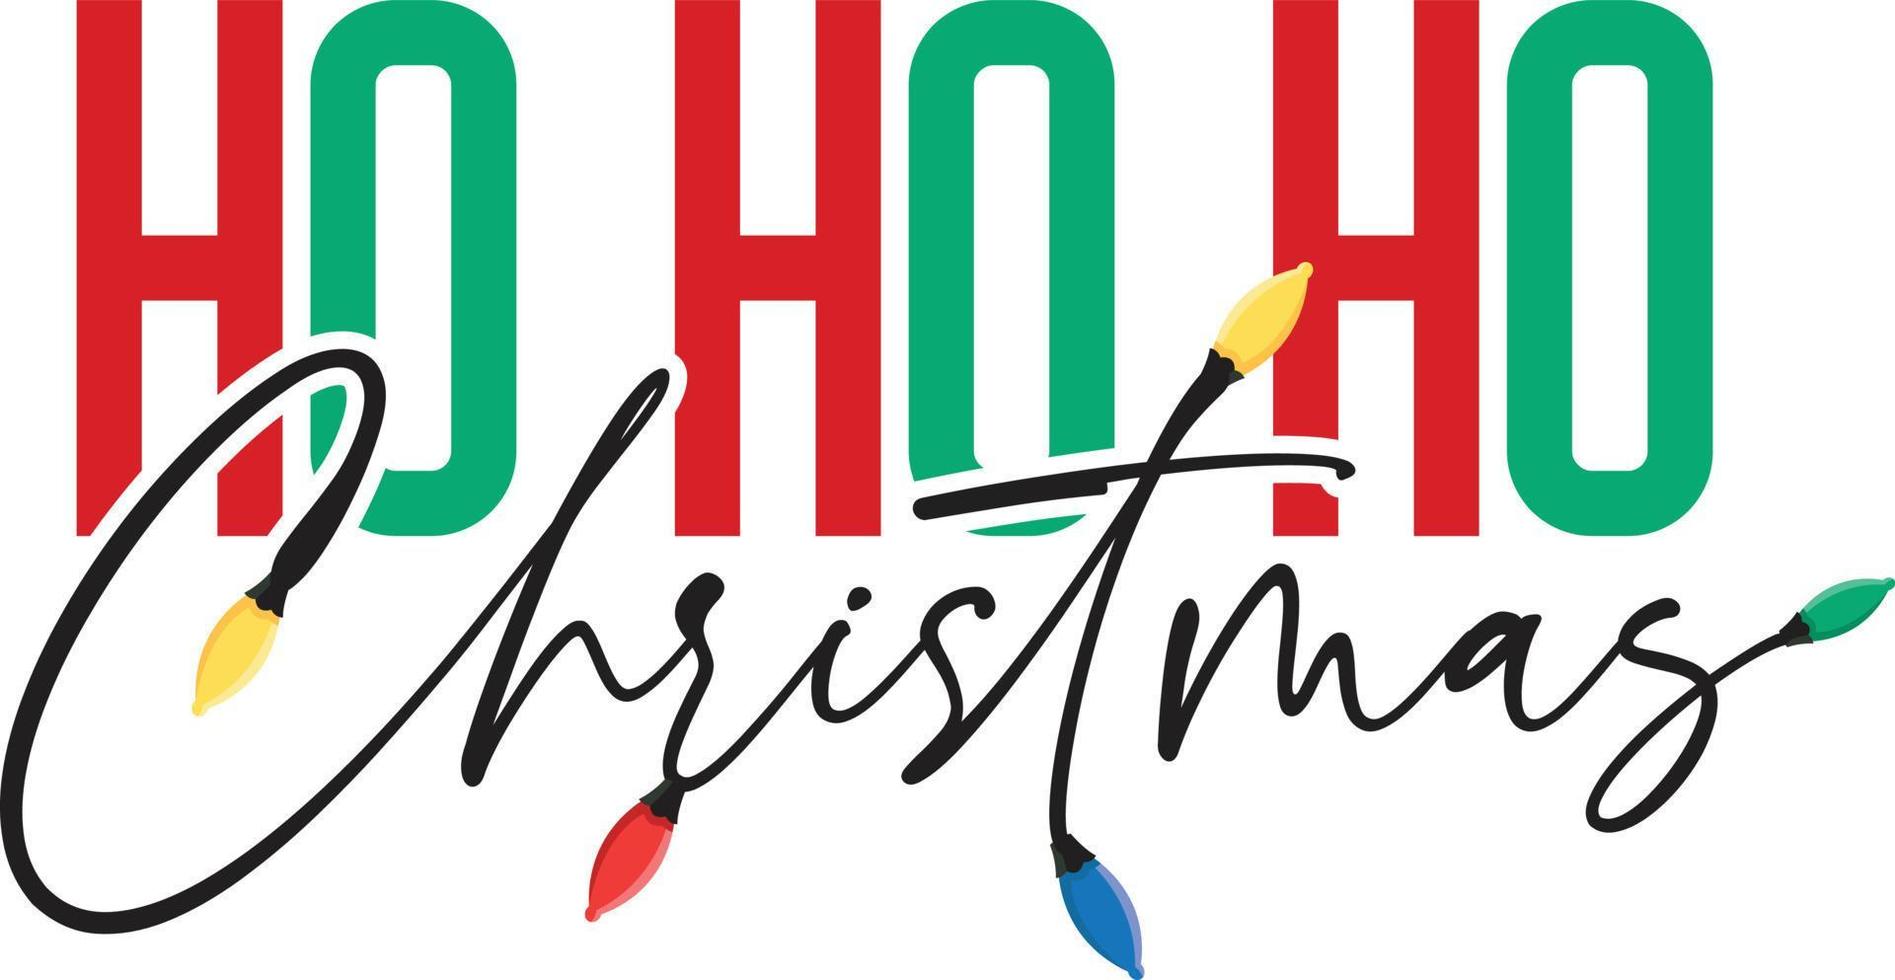 Ho Ho Ho - Christmas greeting typography, with lights, Holiday quotes, and decorations. vector